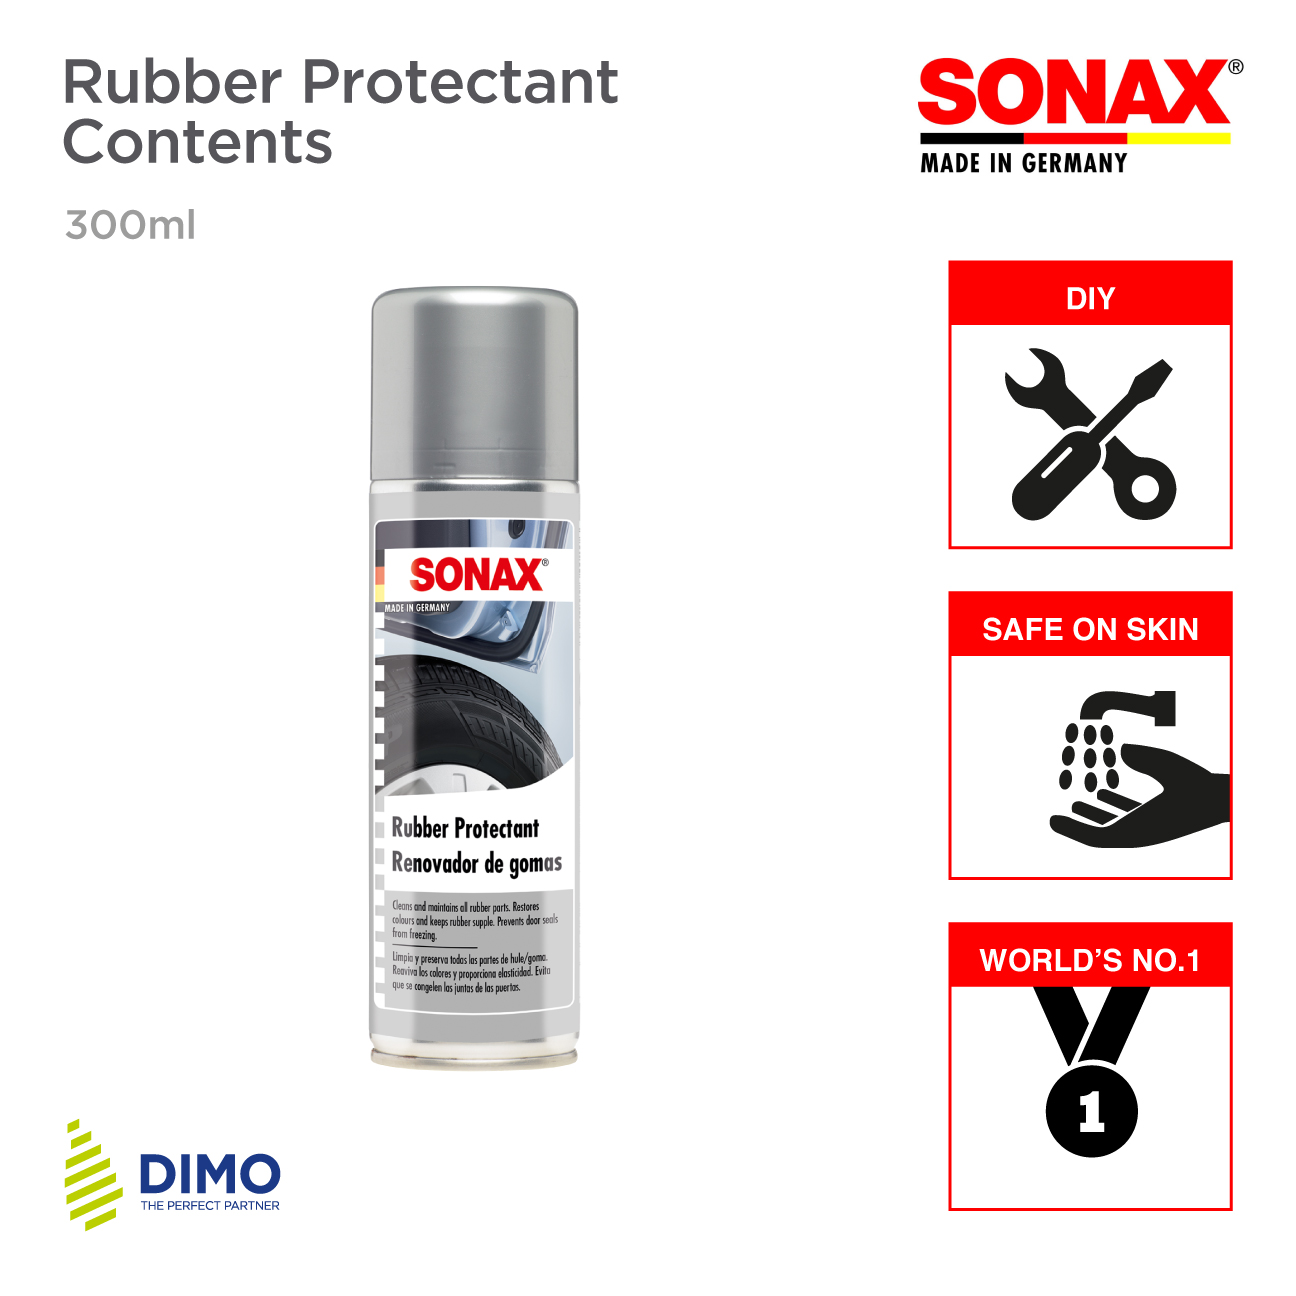 Rubber-Protectant-Contents-300ml